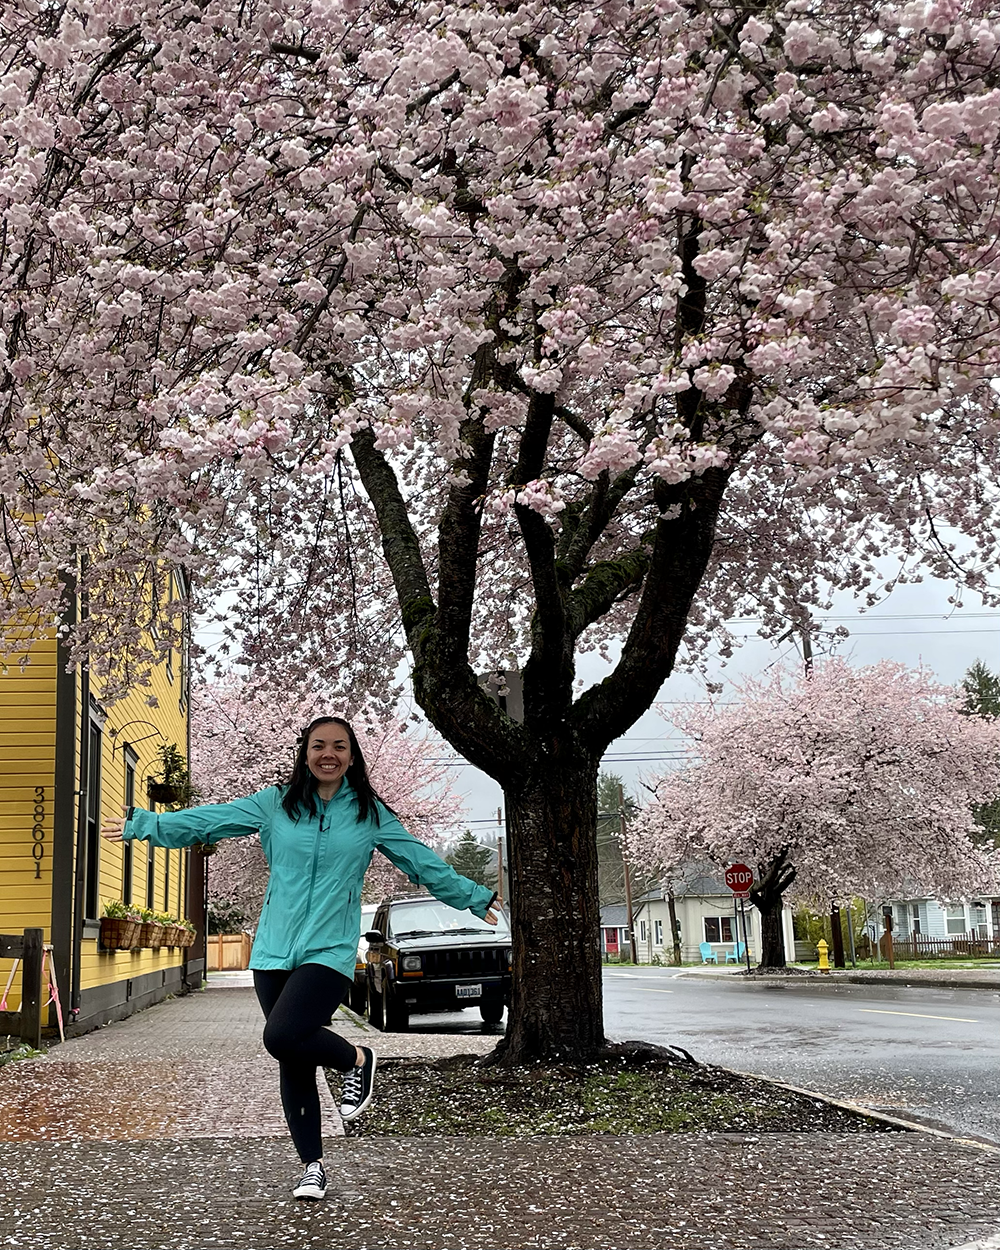  Loving all the cherry blossoms in the town of Snoqualmie.  